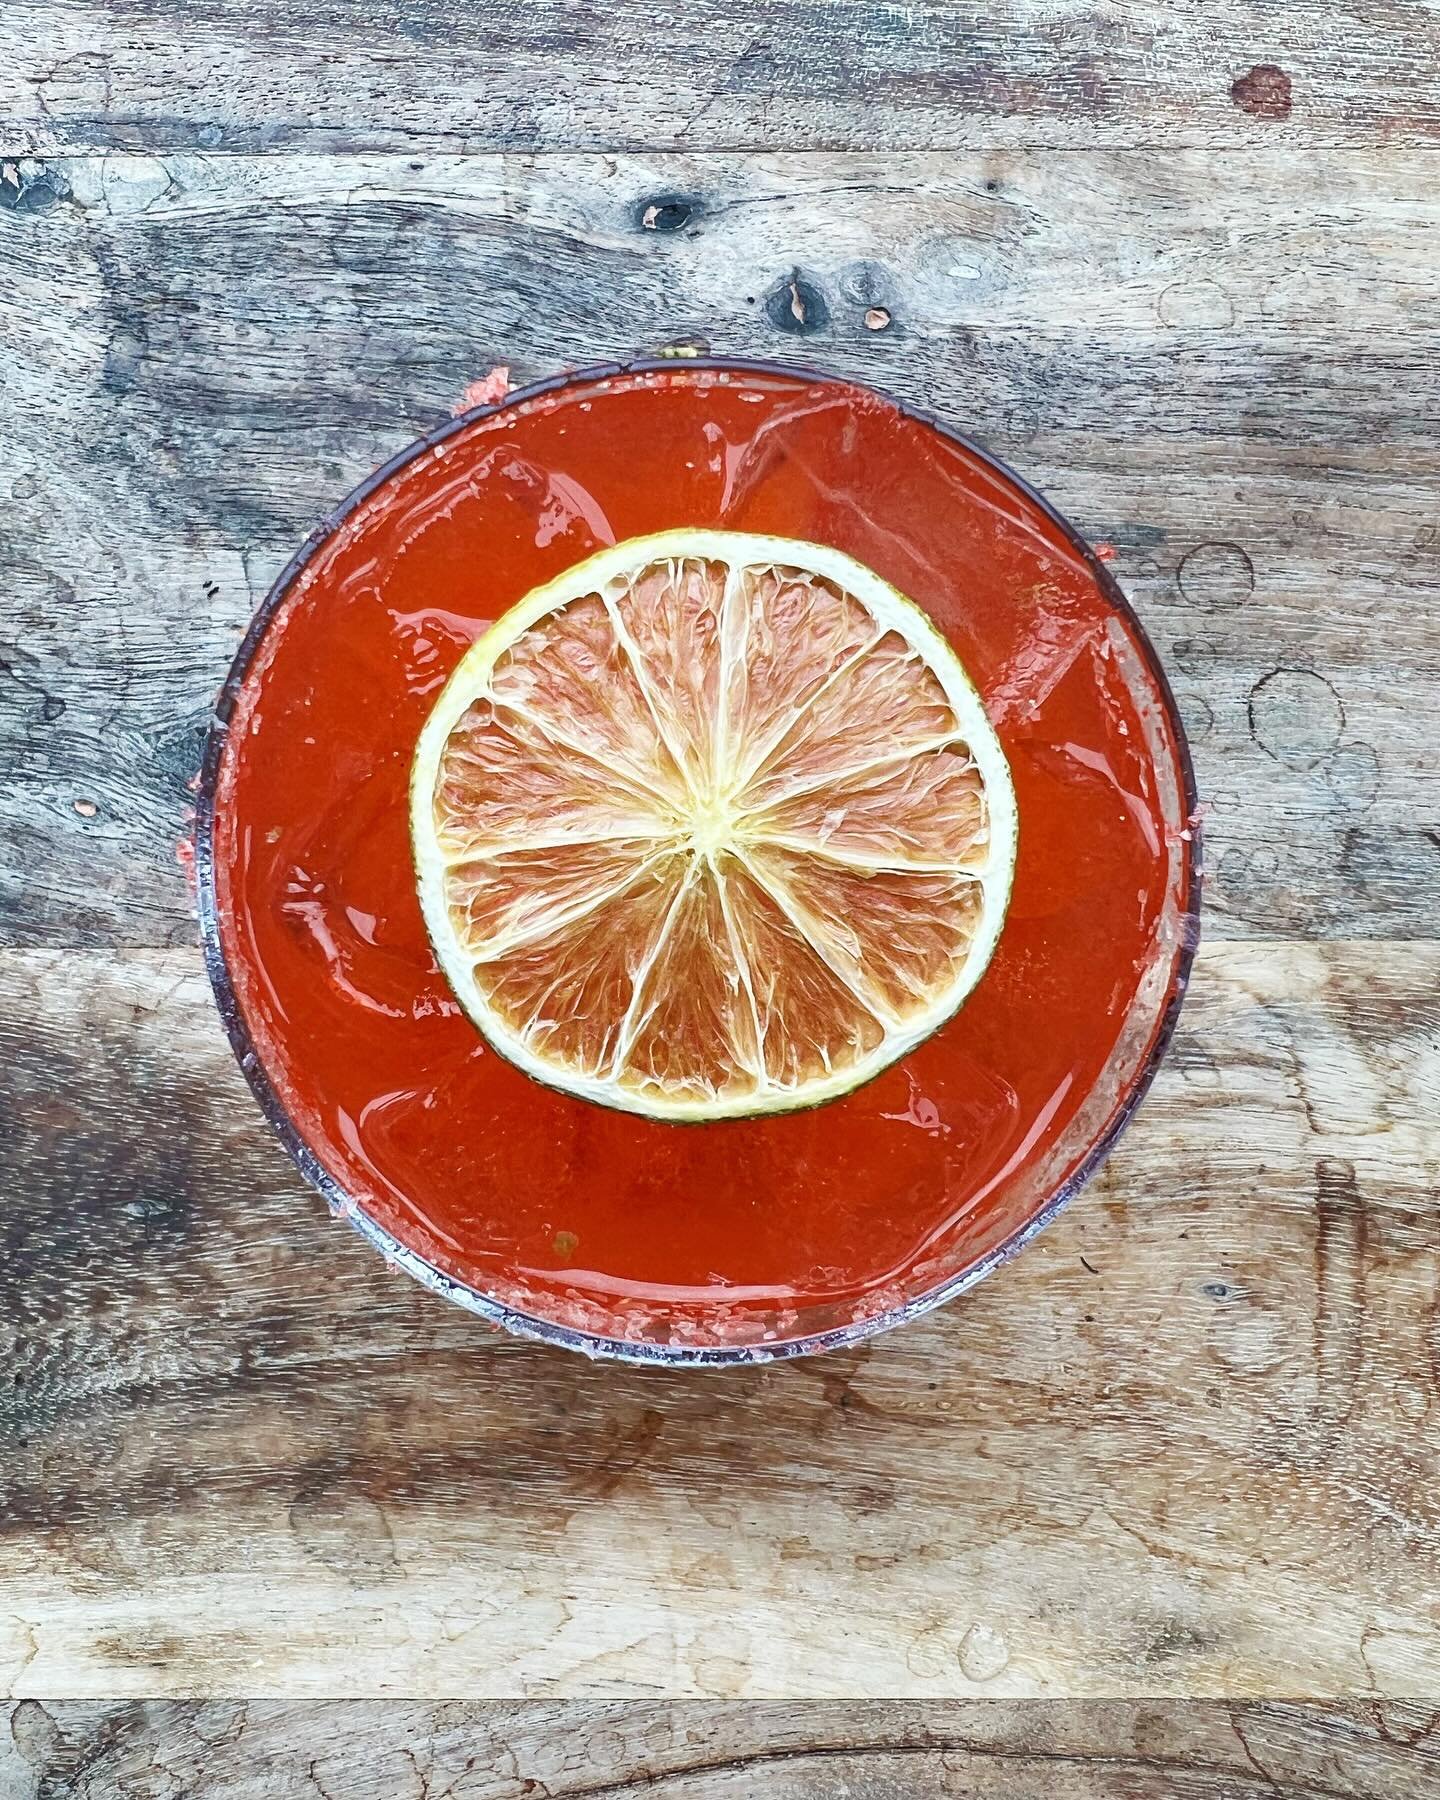 ☔️☁️☔️☁️☔️☁️☔️

rainy days call for a new cocktail
✨STRAWBERRY MARGARITA✨

mi campo tequila
aperol
cointreau
fifer orchard strawberries 
agave
fresh squeezed lime juice 
black pepper
lime zest-strawberry sea salt rim

☁️☔️☁️☔️☁️☔️

andddd just a remi